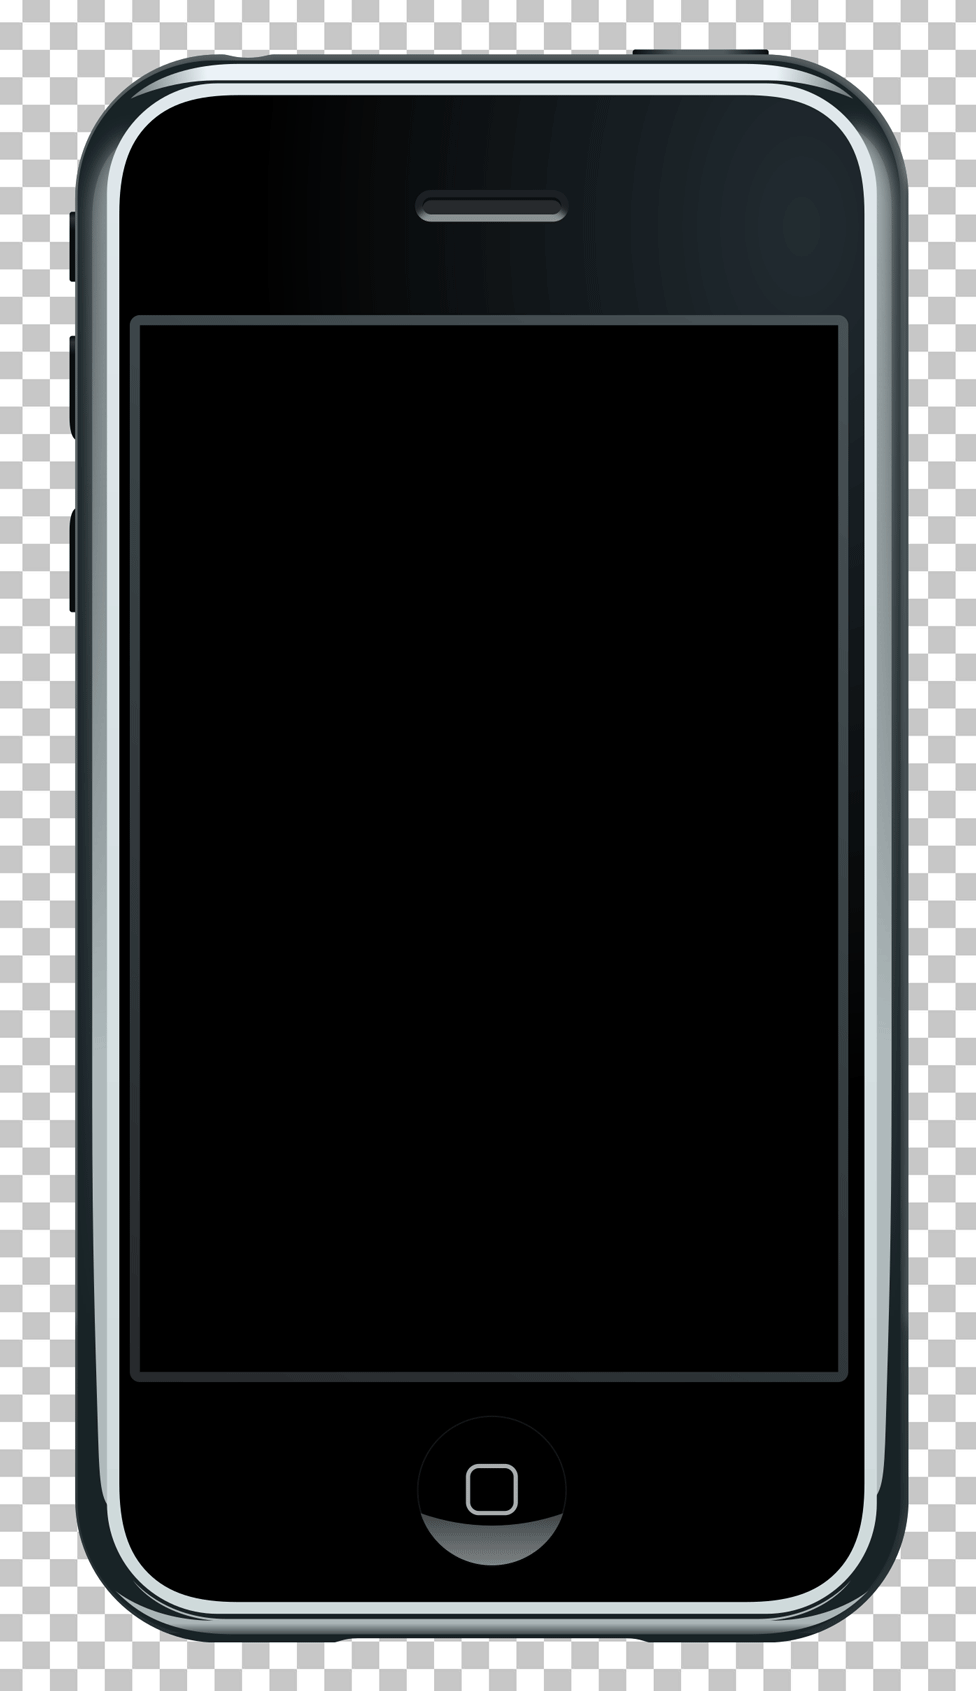 IPhone 1 png image